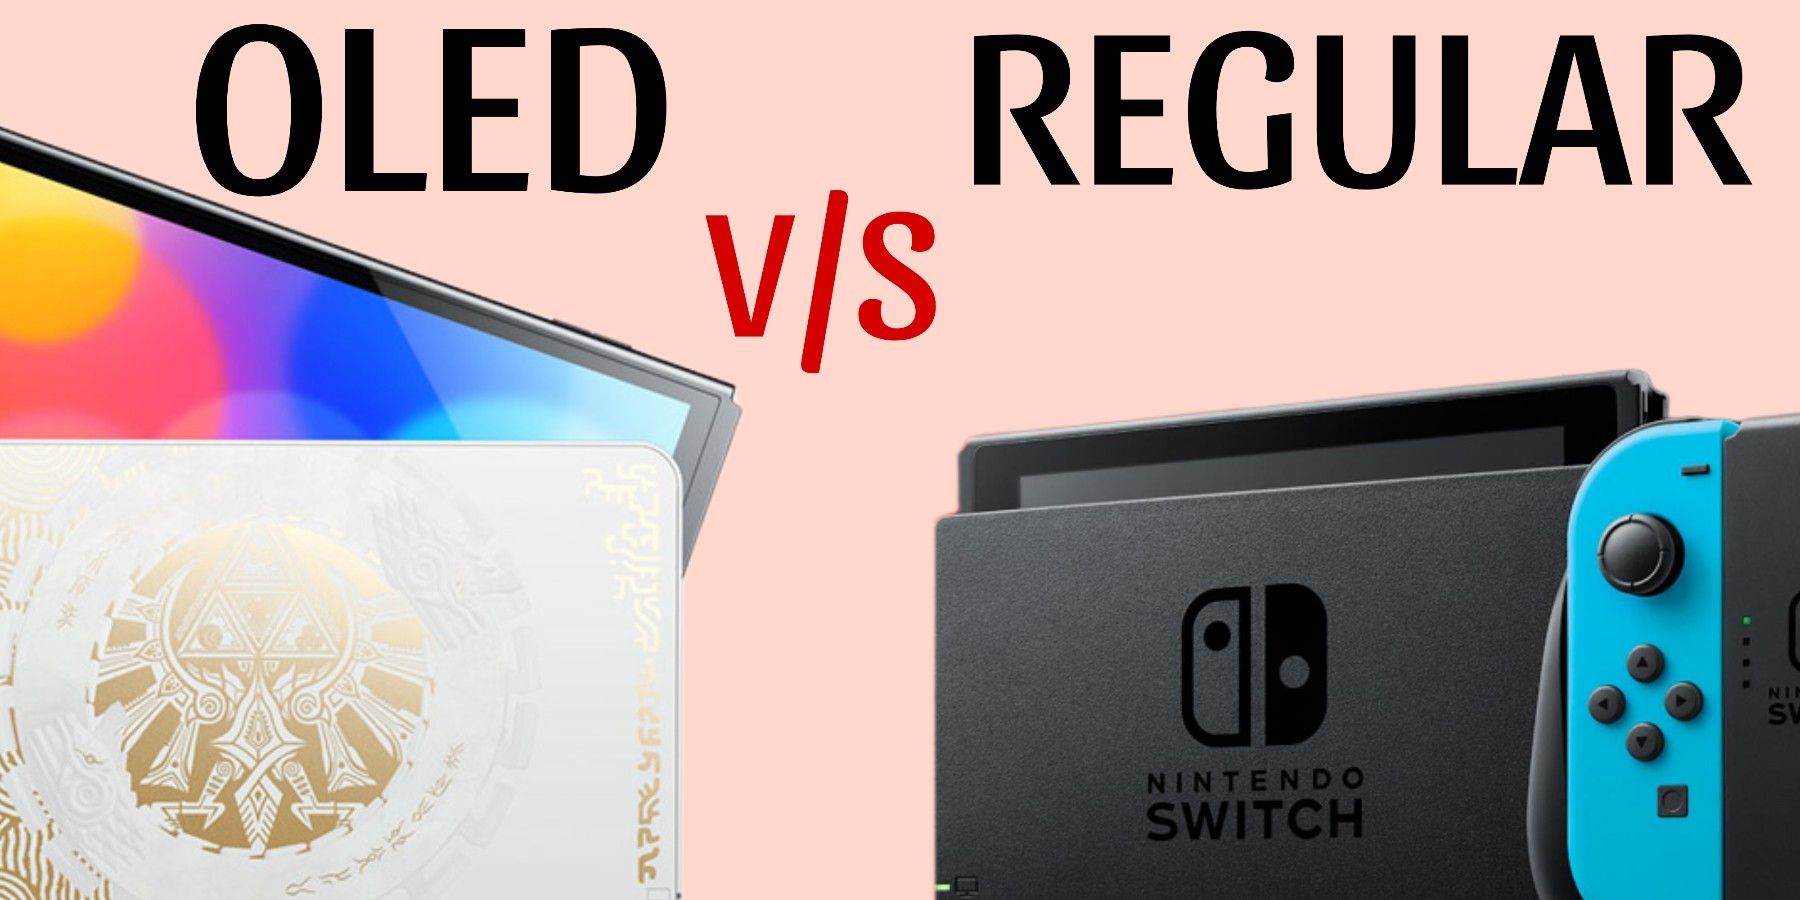 featured Nintendo switch OLED vs regular differences which is better